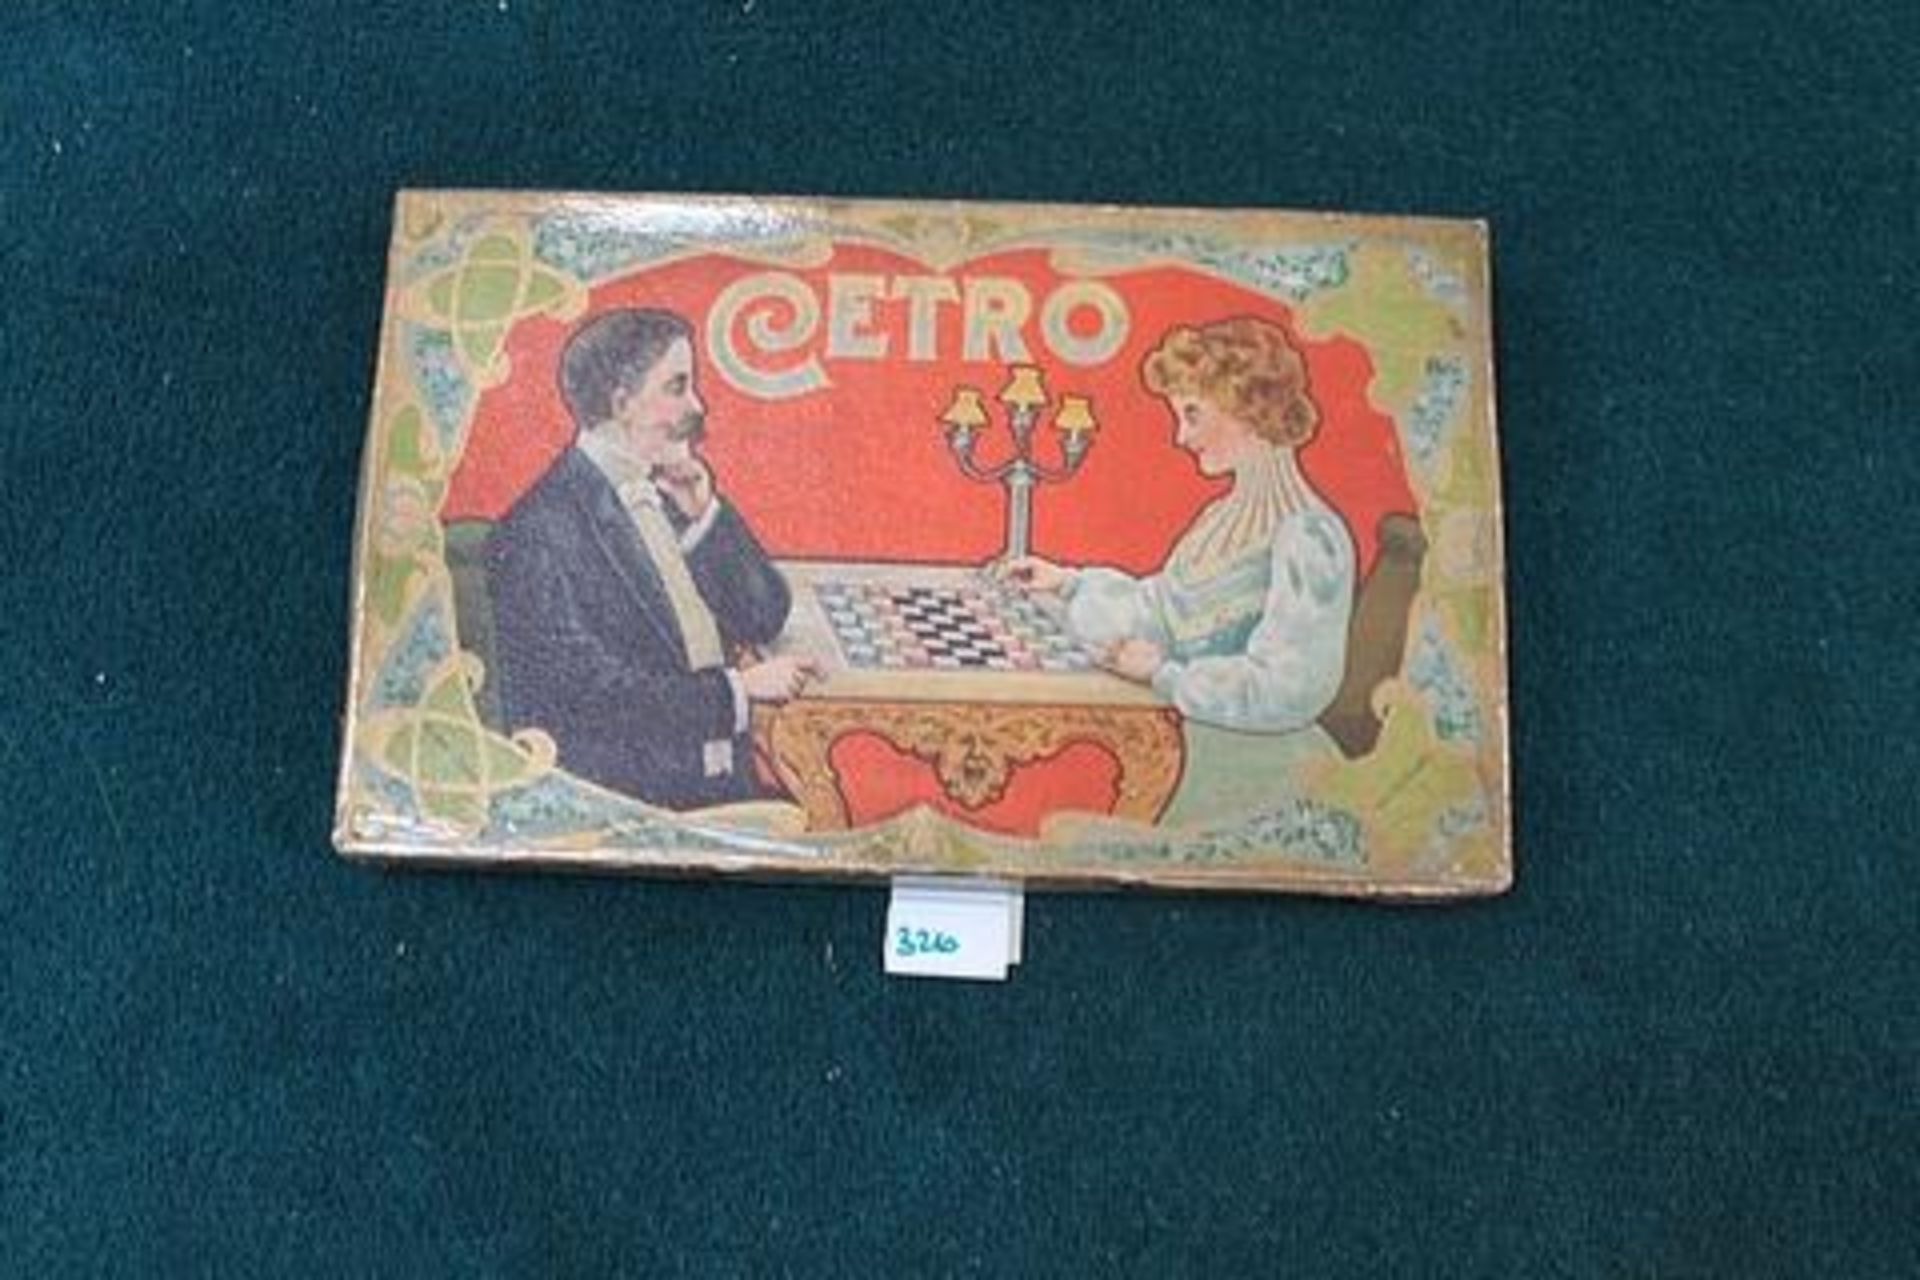 Cetro (1903) Board Game In Box The Players Have To Get Their 14 Playing Pieces (Crowns And Bishop'